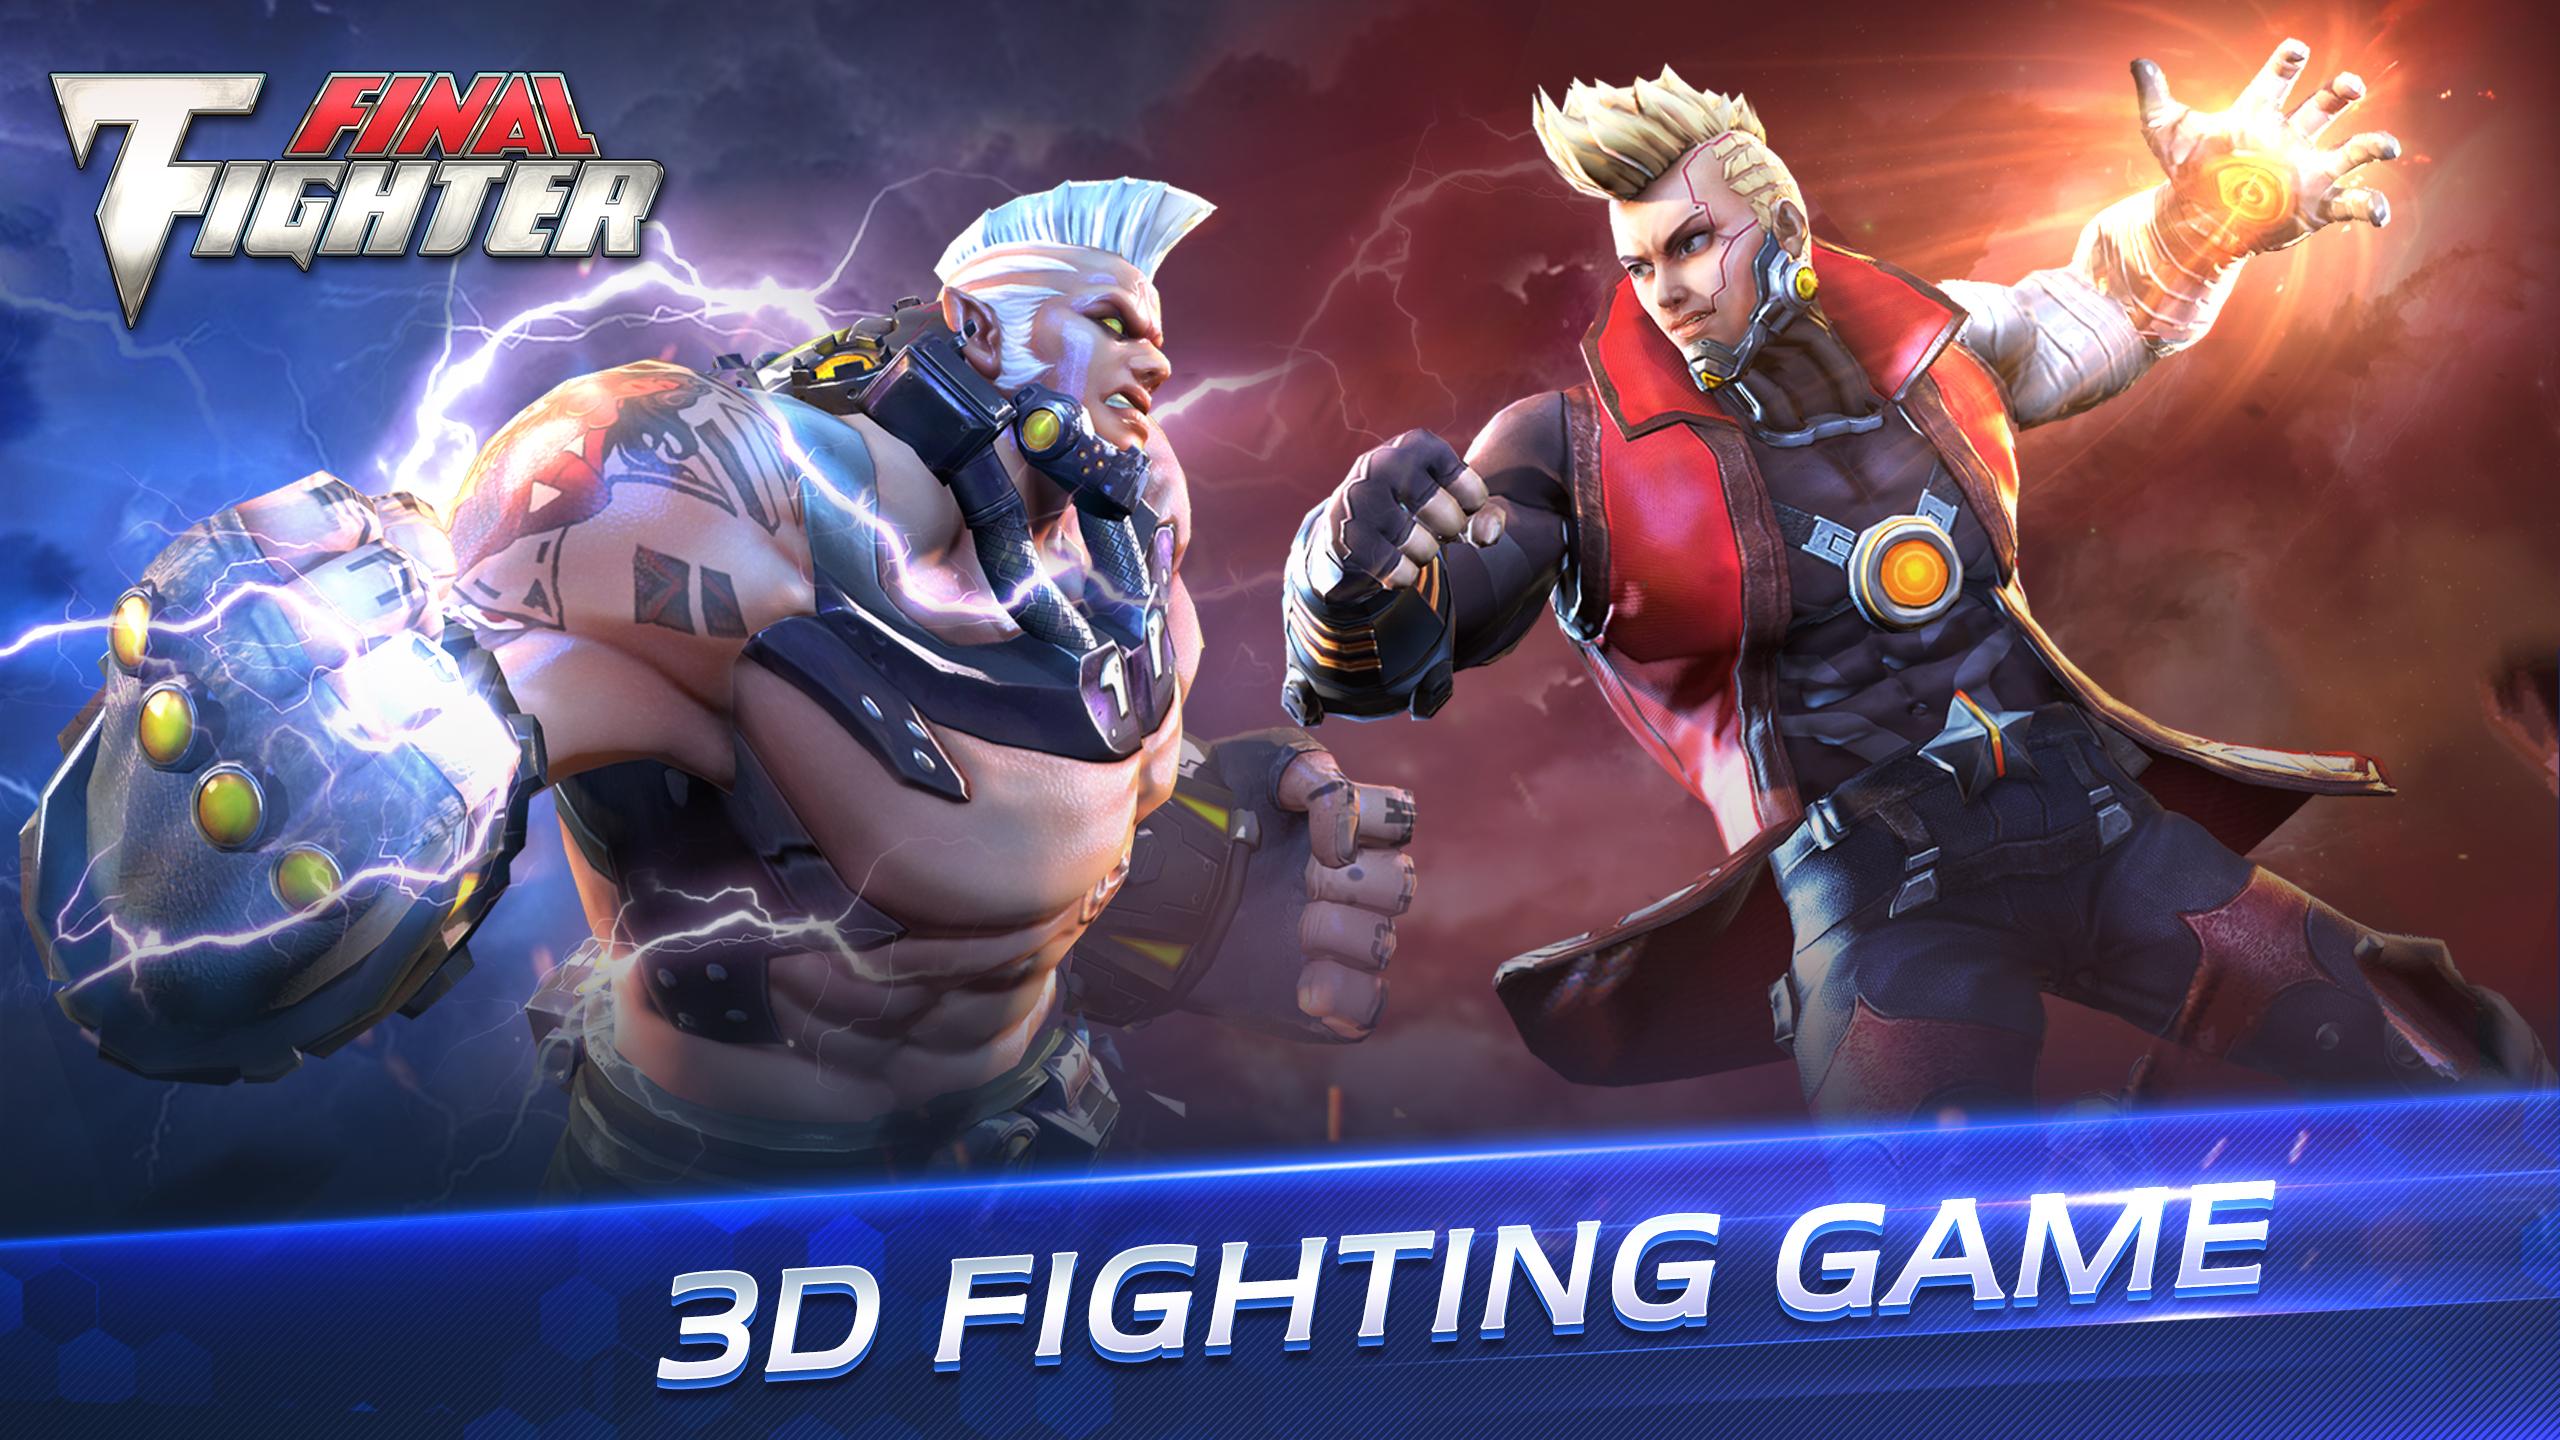 Final Fighter for Android - APK Download - 